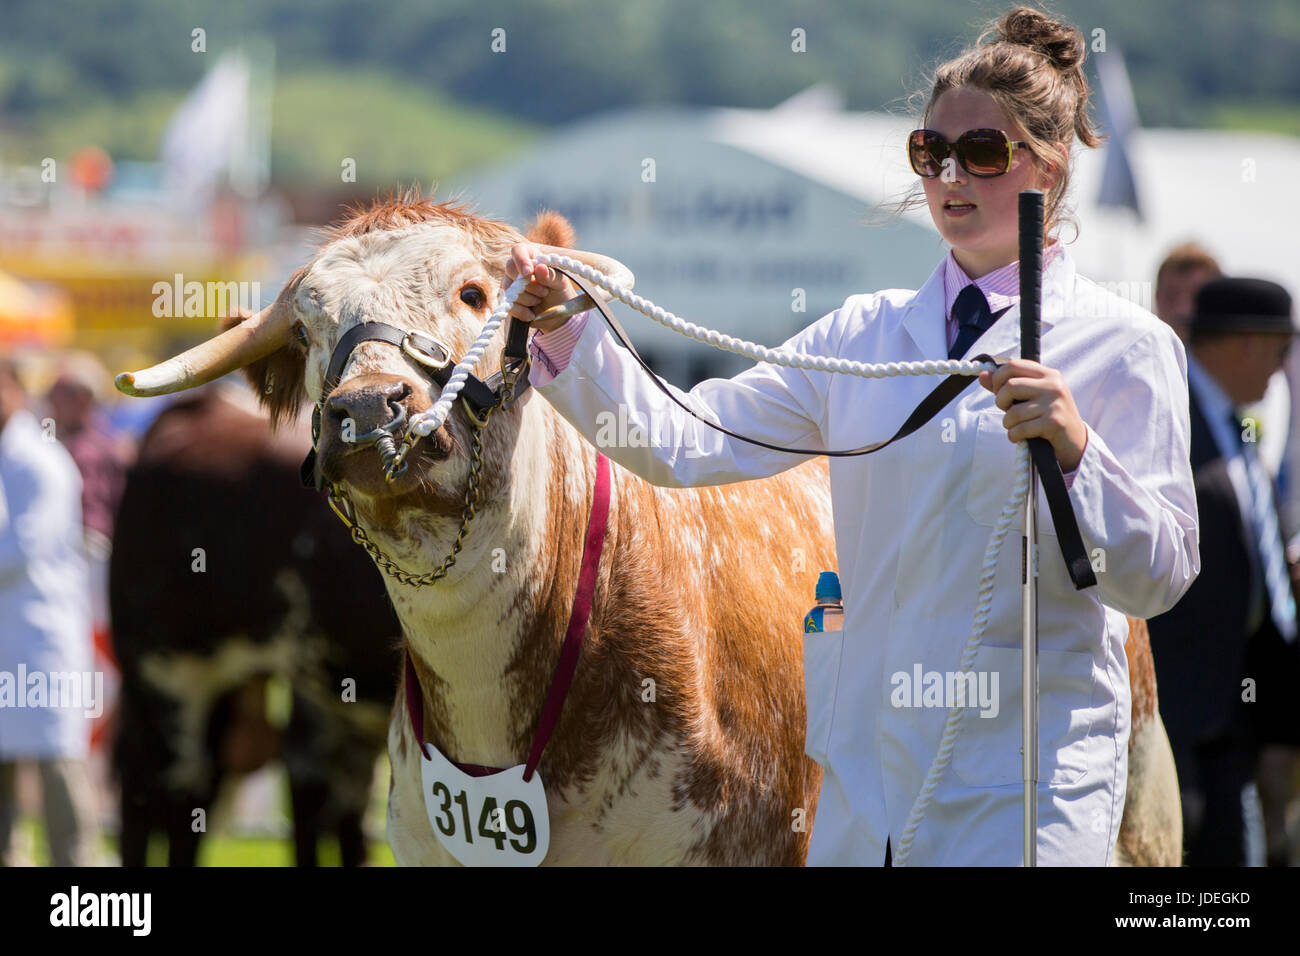 A bull is exhibited during the Royal Welsh Show 2016 at the Royal Welsh Showground, Llanelwedd, Builth Wells, Powys, Wales, UK, July 19th 2016. Stock Photo